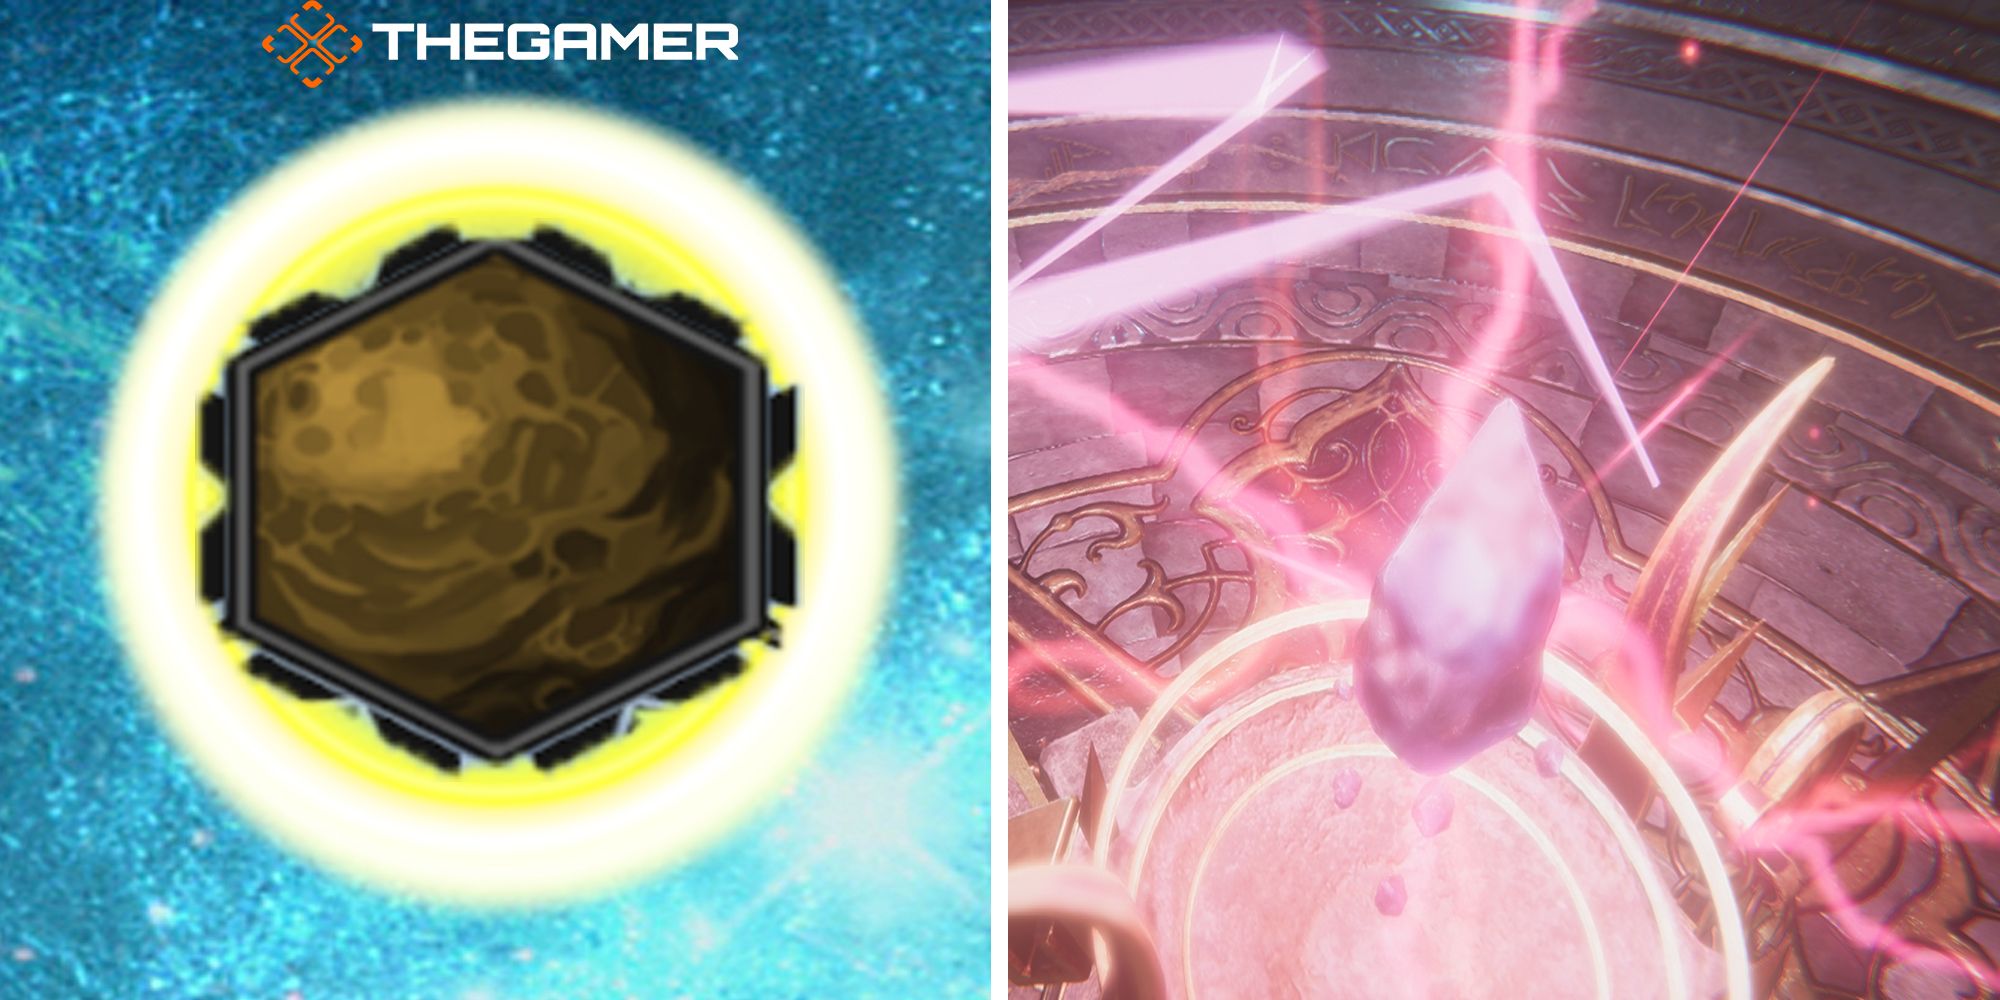 A close-up view of a shining shard gem (left). A gemstone is filled with power during the mysterious Ascendance ritual (right). Edge of Eternity.